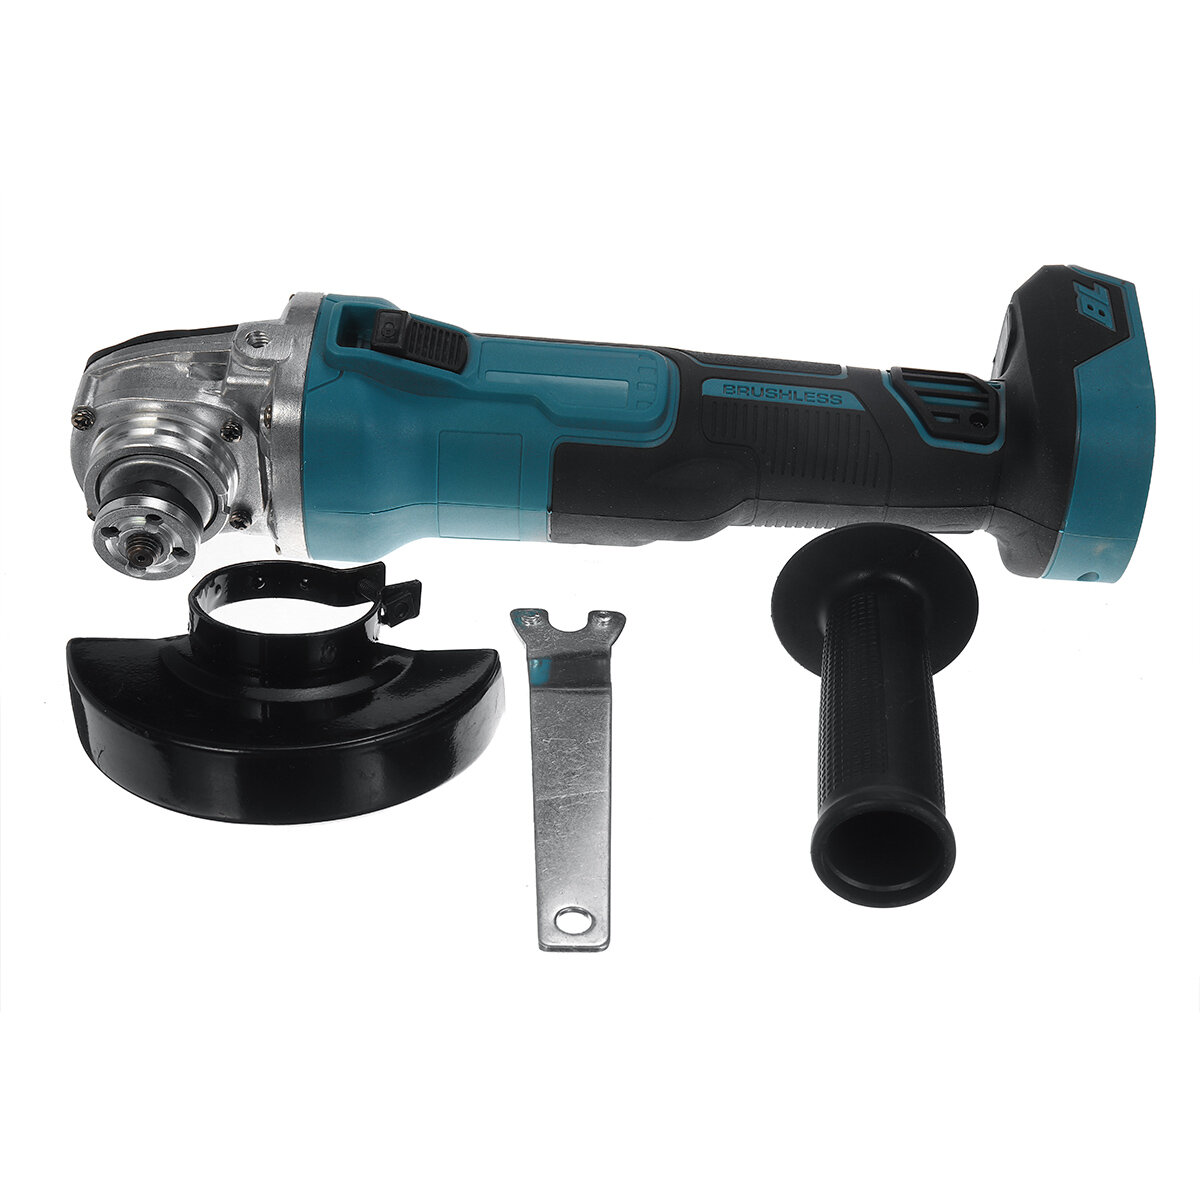 Image of Drillpro Electric Brushless Cordless Angle Grinder M10 125mm Cut for Makiita 18V Battery